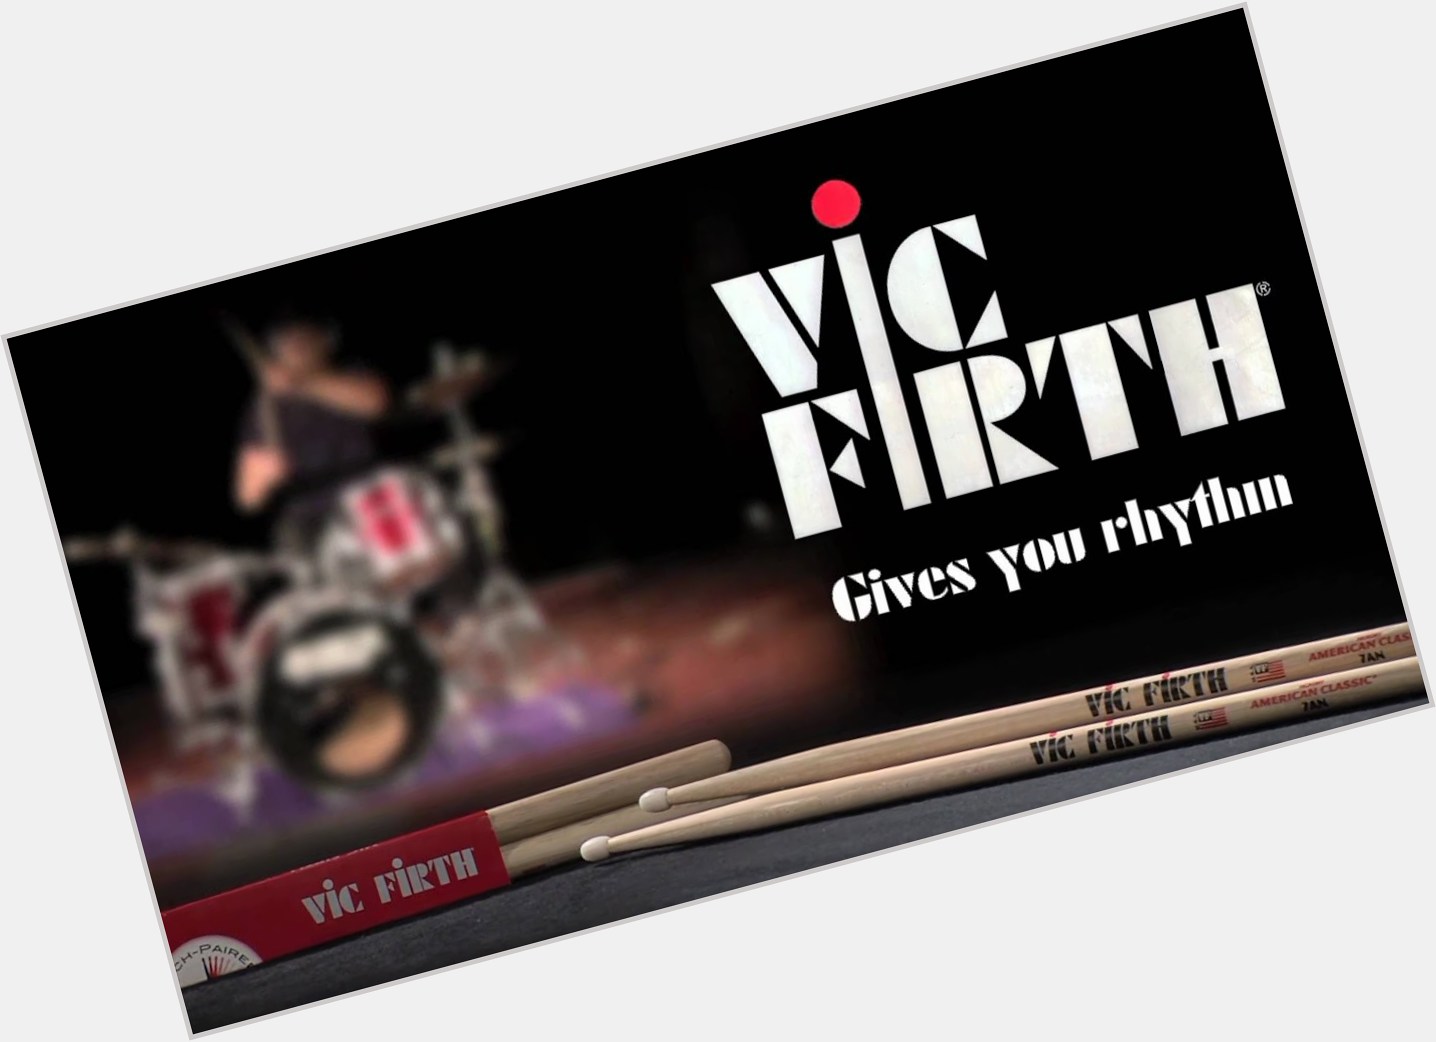 Vic Firth dating 2